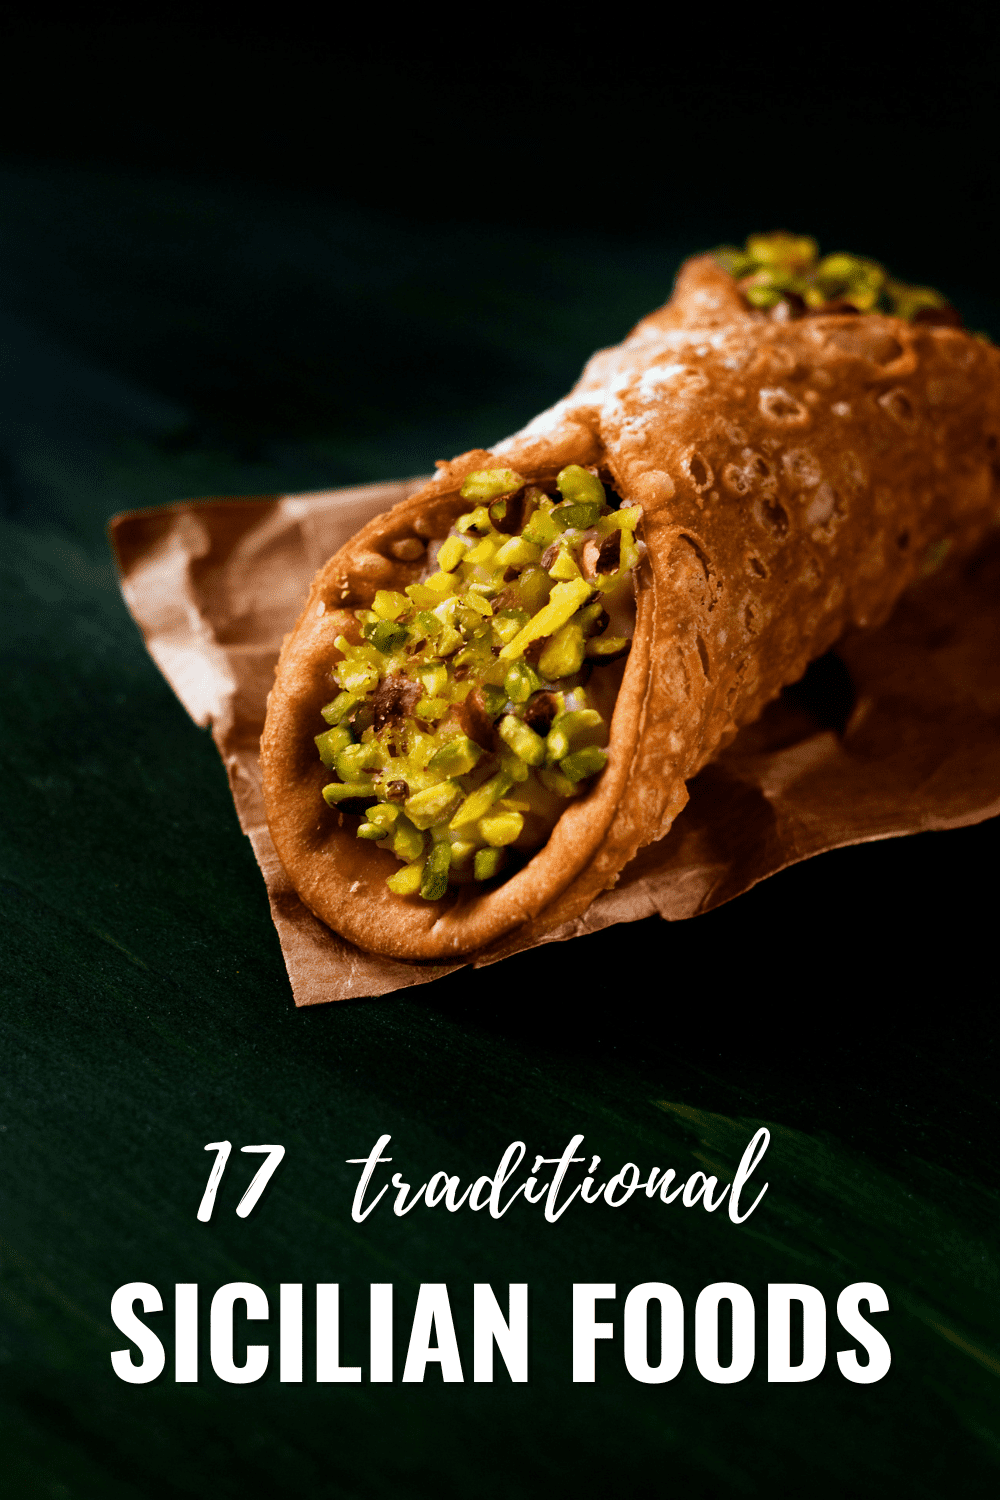 Cannoli sprinkled with crushed pistachios. Text overlay says "17 traditional Sicilian foods"